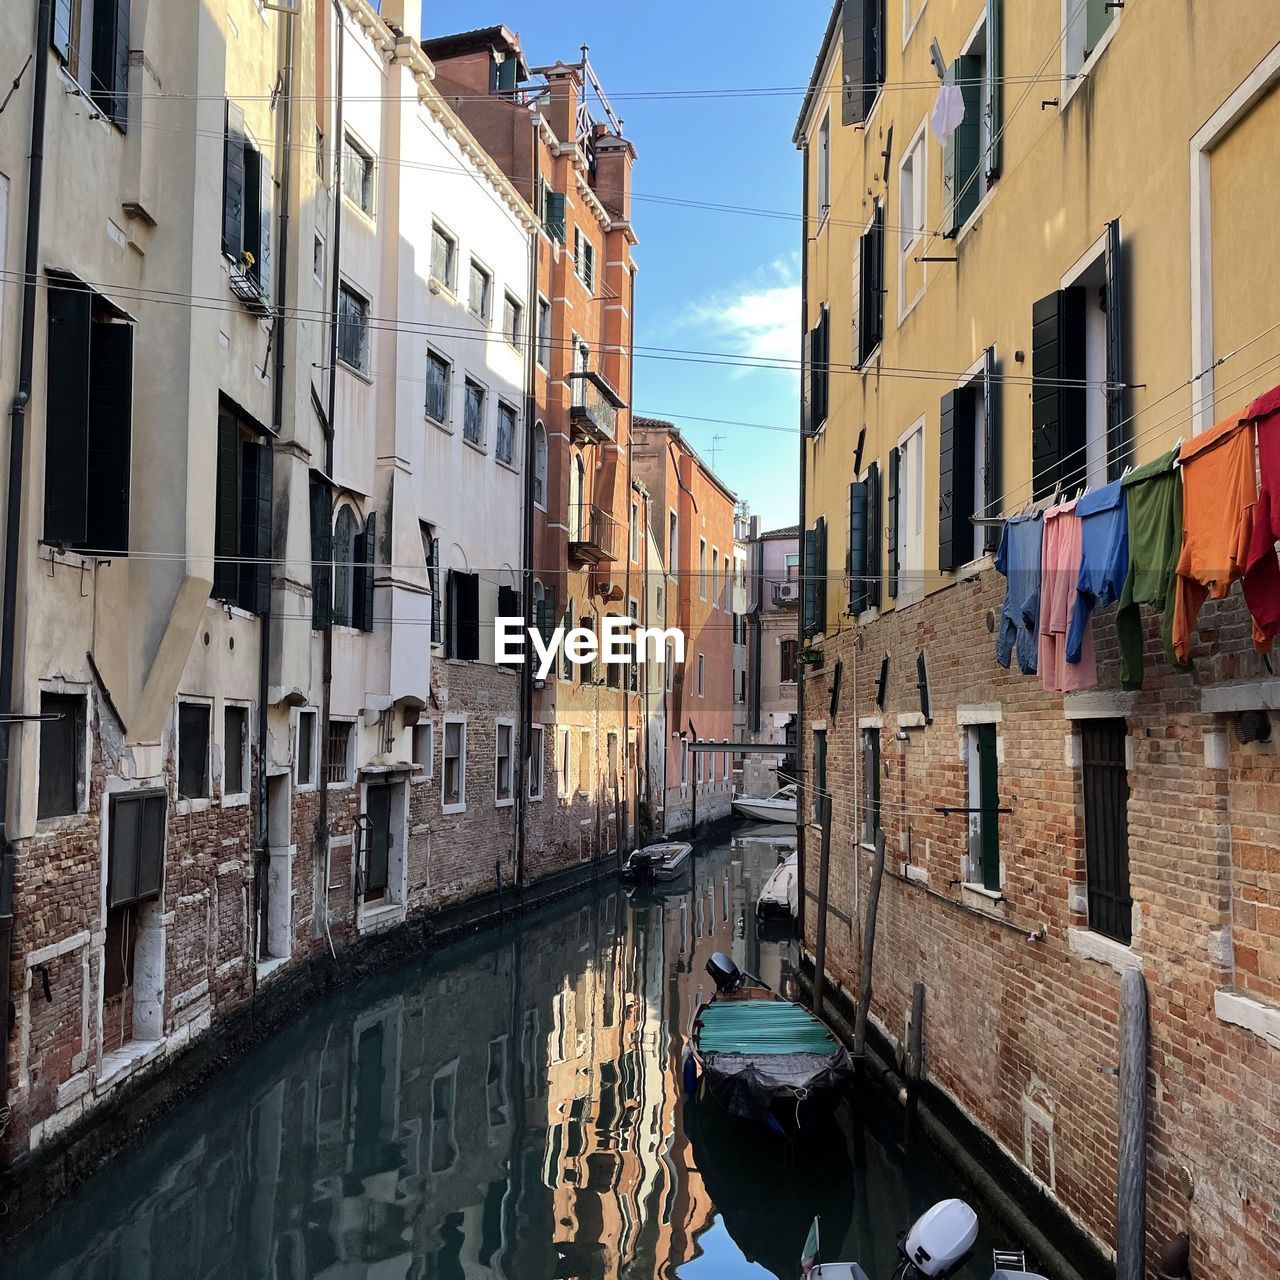 Rio del ghetto nuovo, one of the canals of the venice old jewish quarter, on a sunny day.